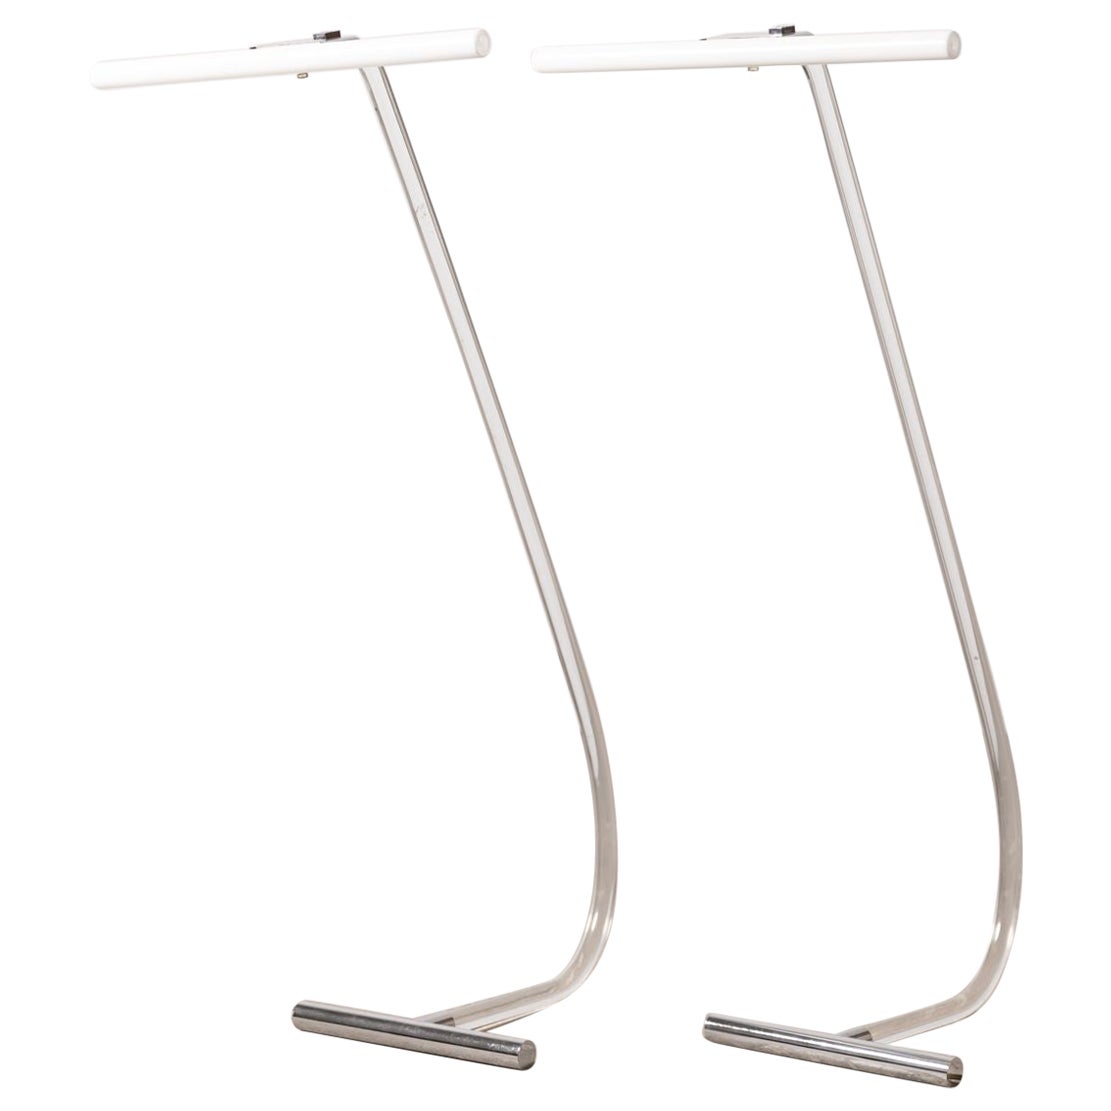 Peter Hamburger Crylicord Floor Lamps from Estate of the Vice President of Knoll For Sale